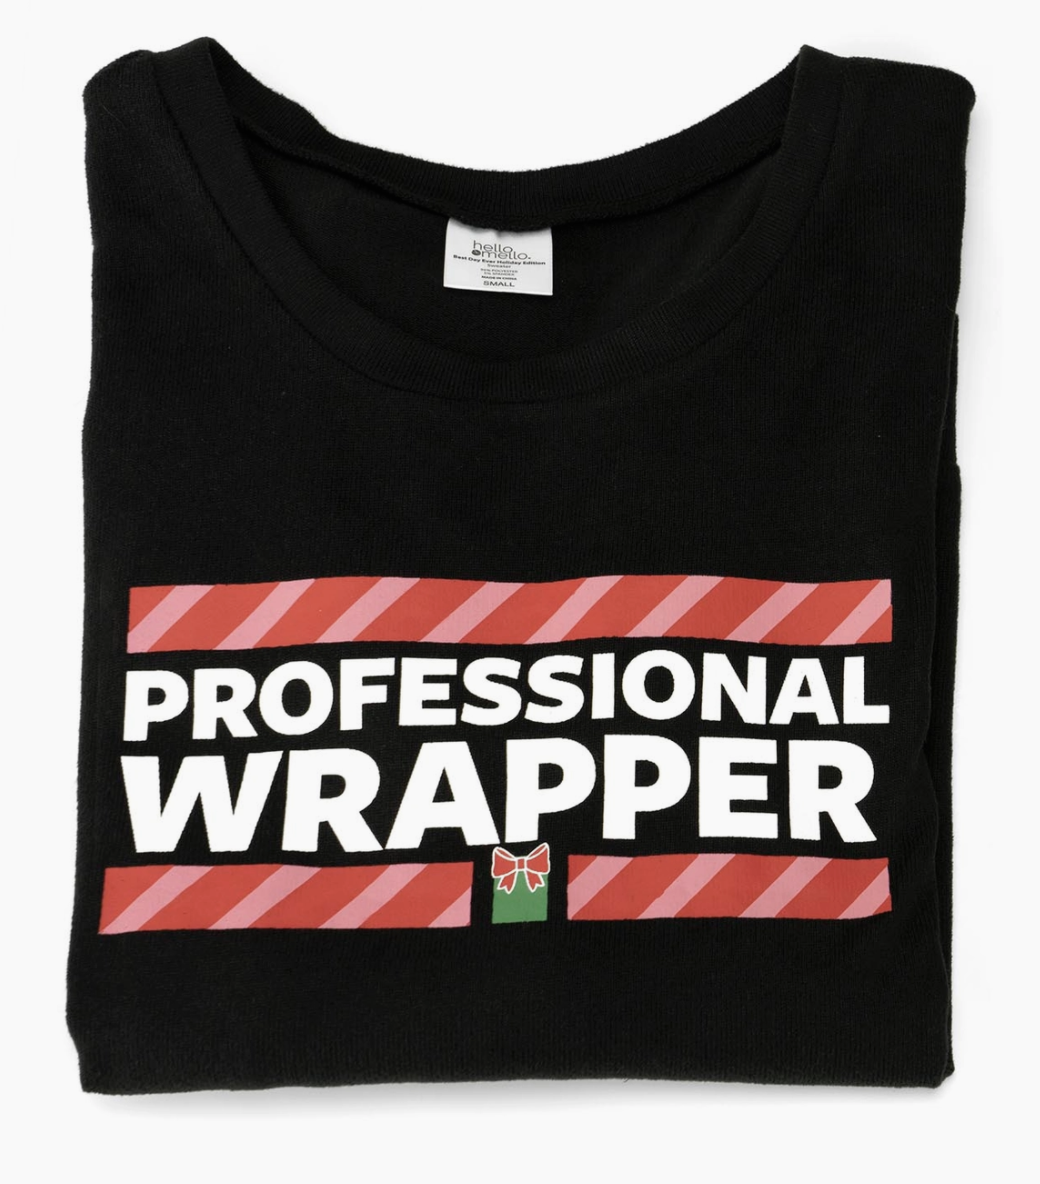 Professional Wrapper Top